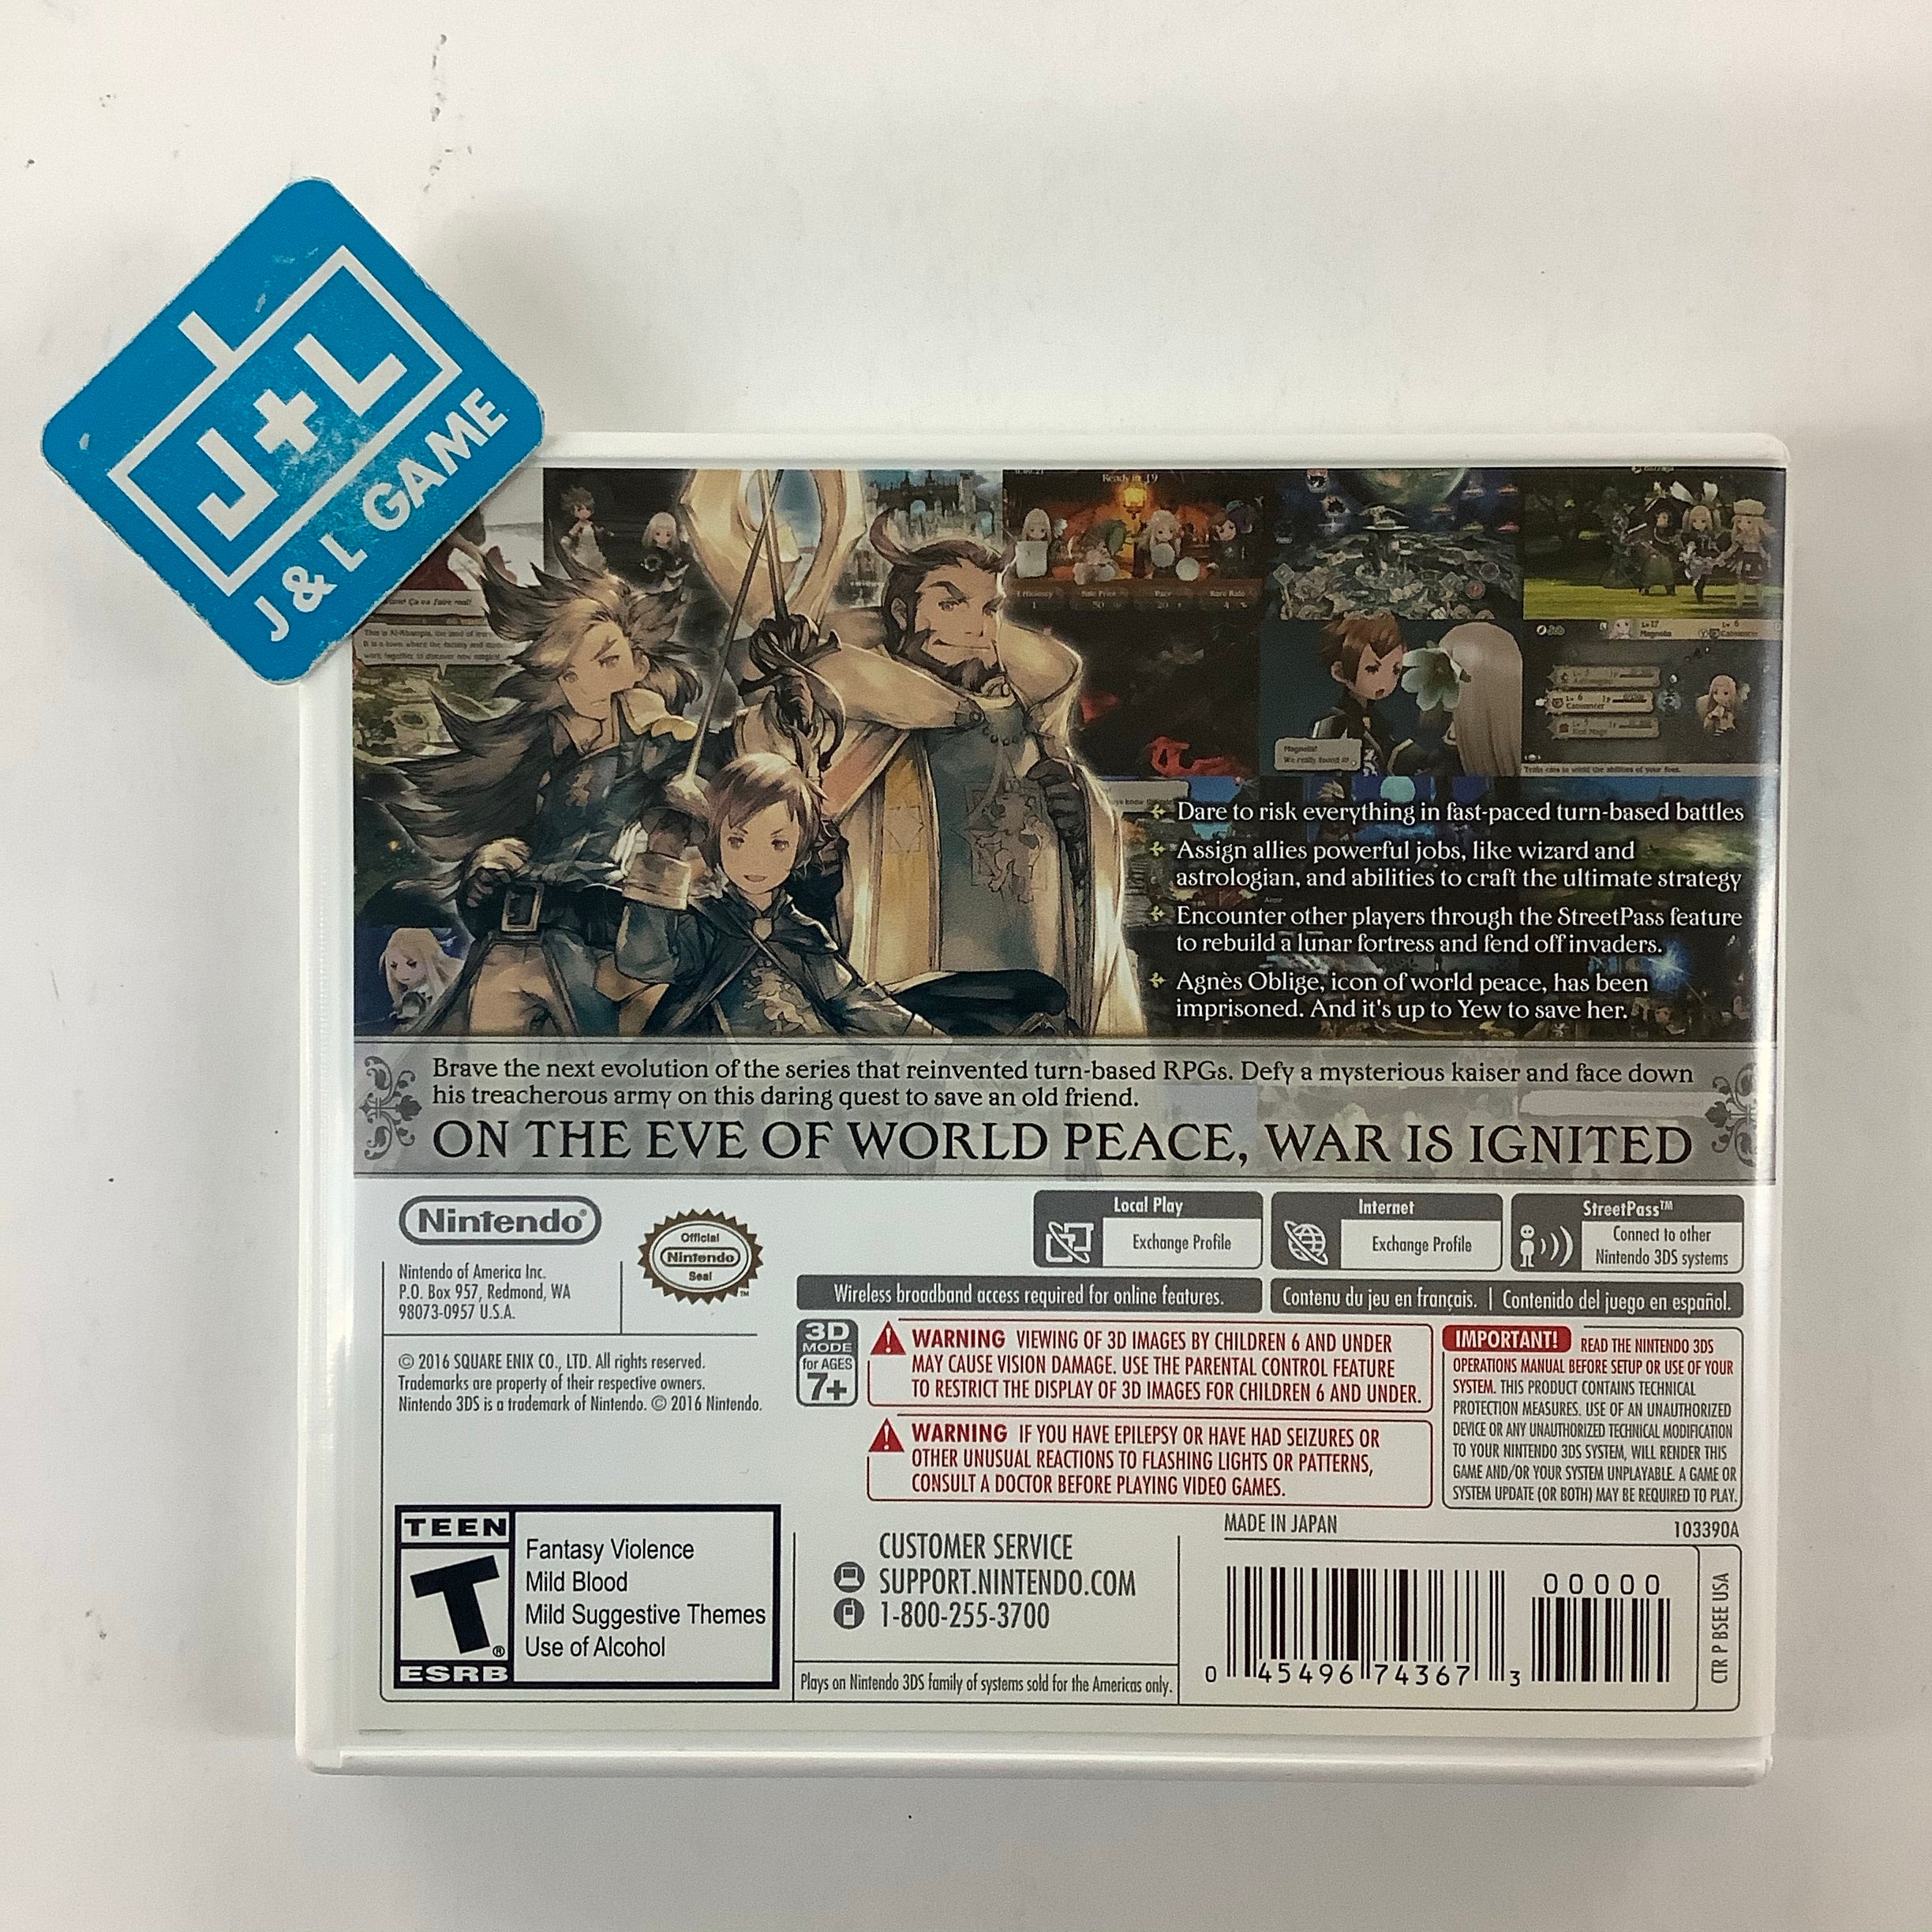 Bravely Second: End Layer - Nintendo 3DS [Pre-Owned] Video Games Nintendo   